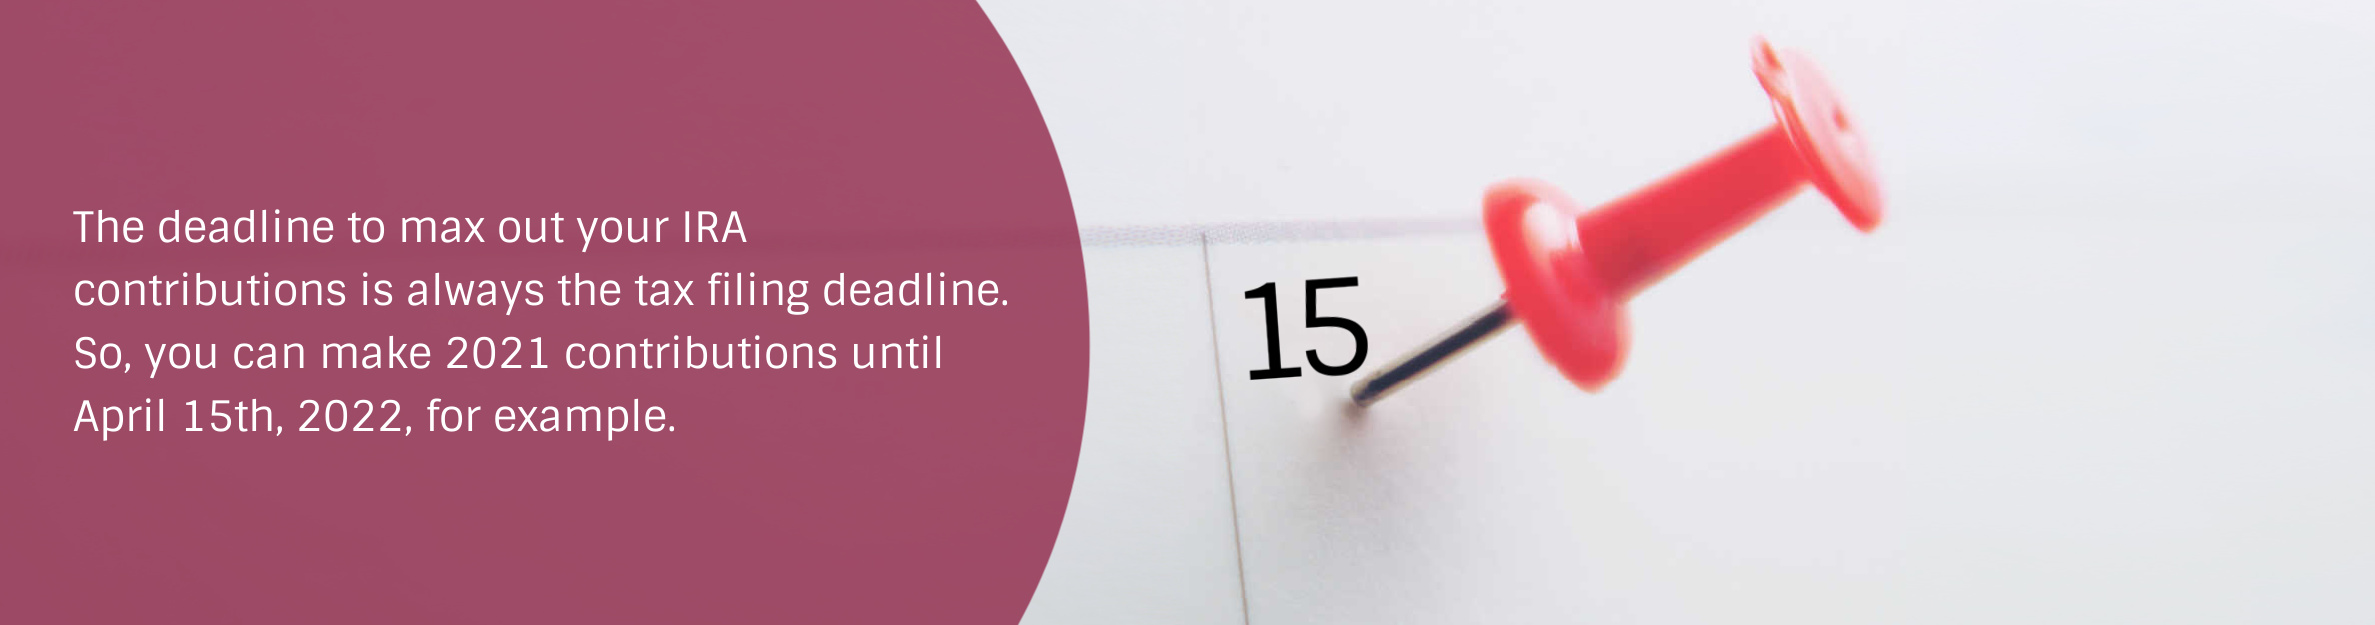 Photo: Calendar
Text: The deadline to max out your IRA contributions is always the tax filing deadline. So, you can make 2021 contributions until April 15th, 2022, for example.